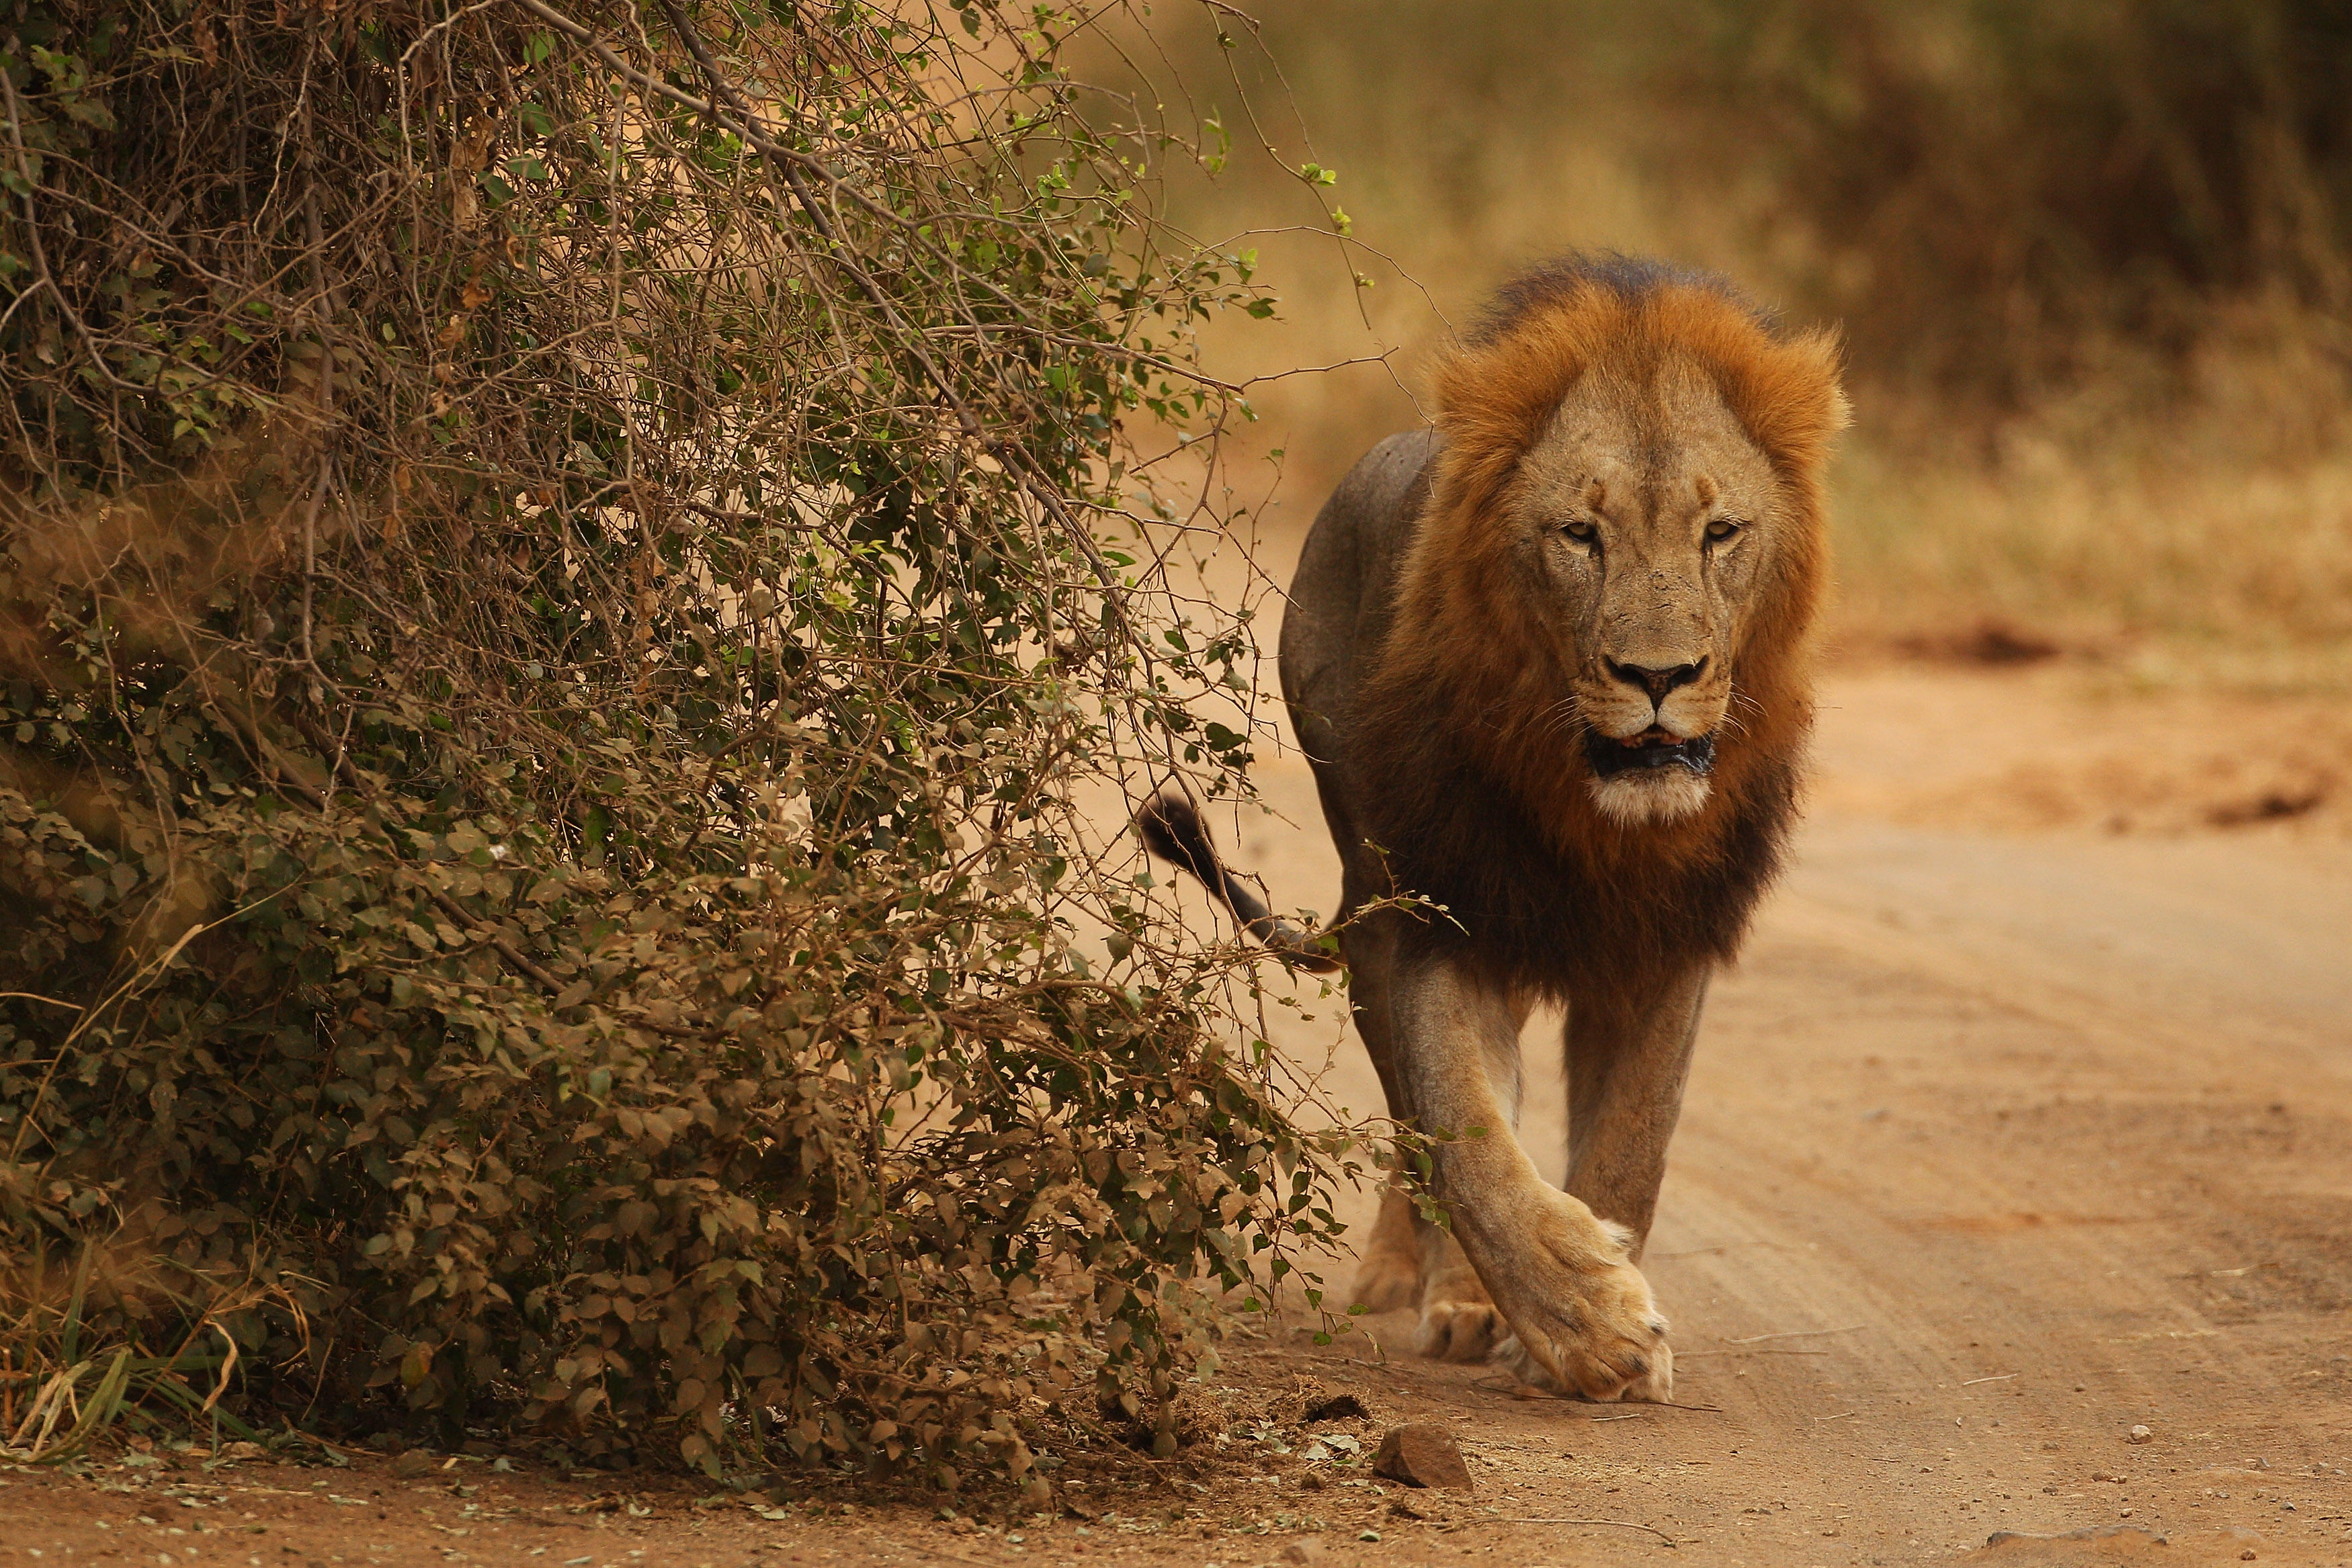 Lions kill suspected poacher in South Africa - CBS News